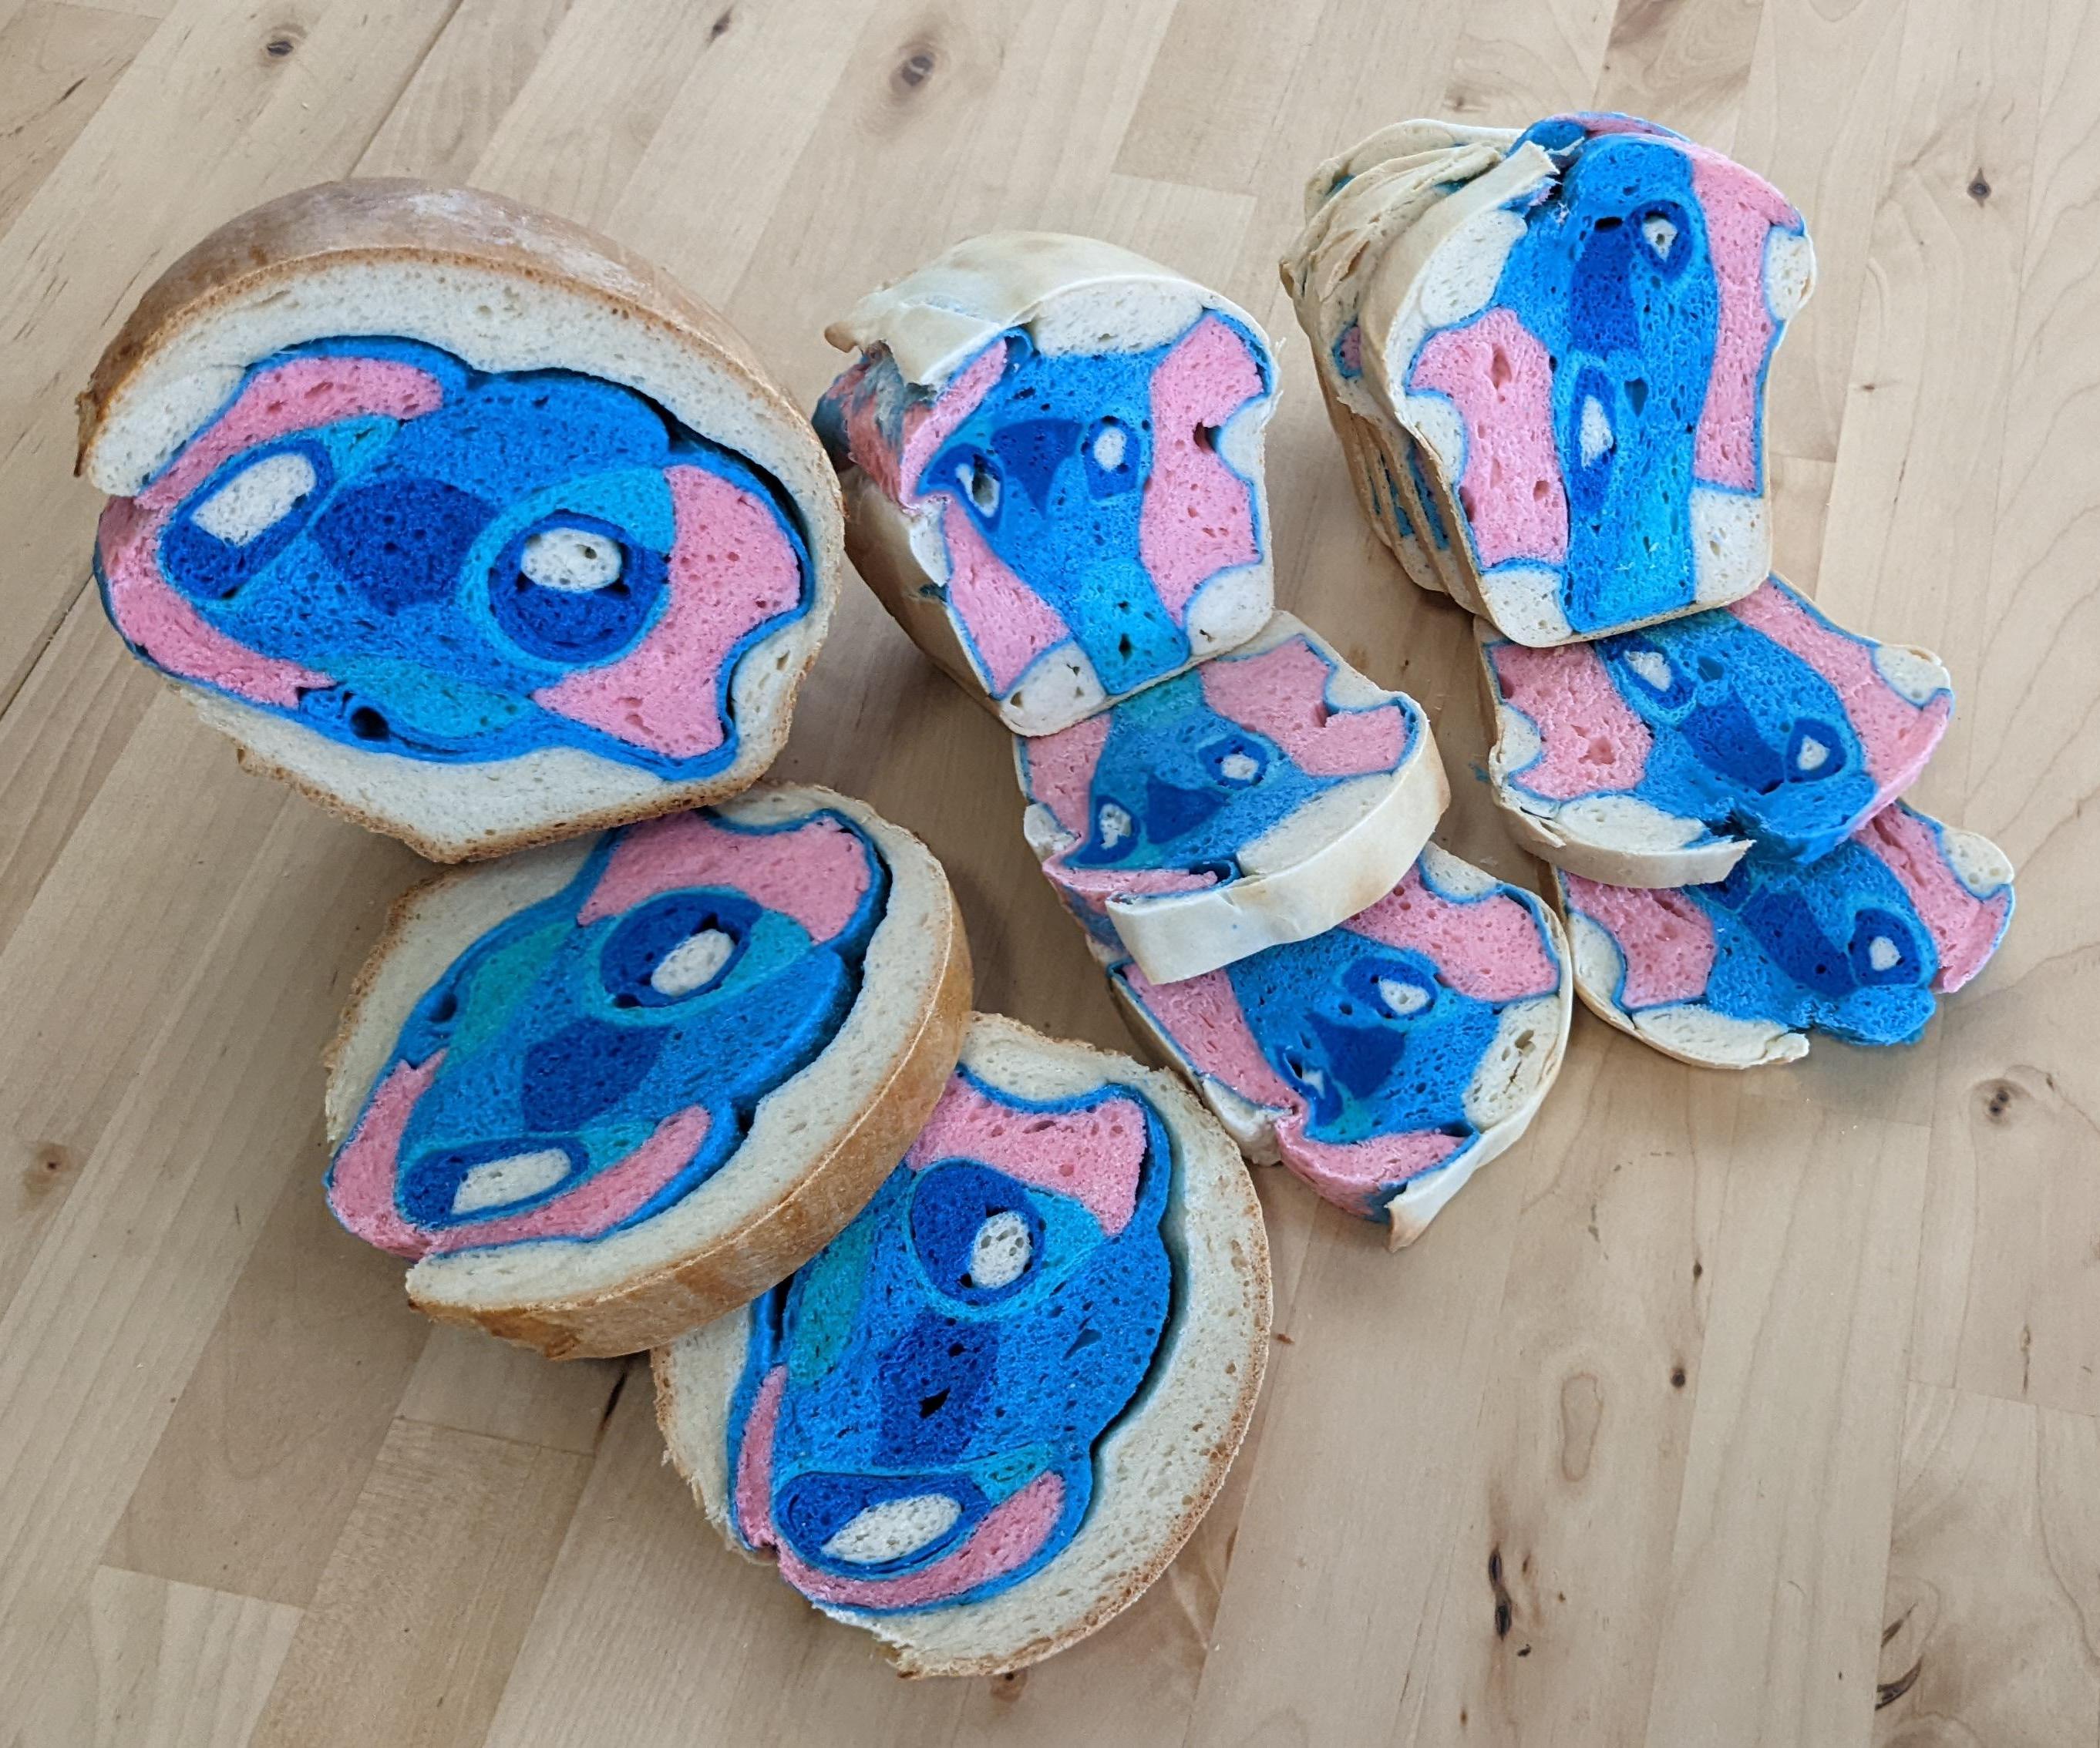 Stitch Character Bread and Lessons Learned